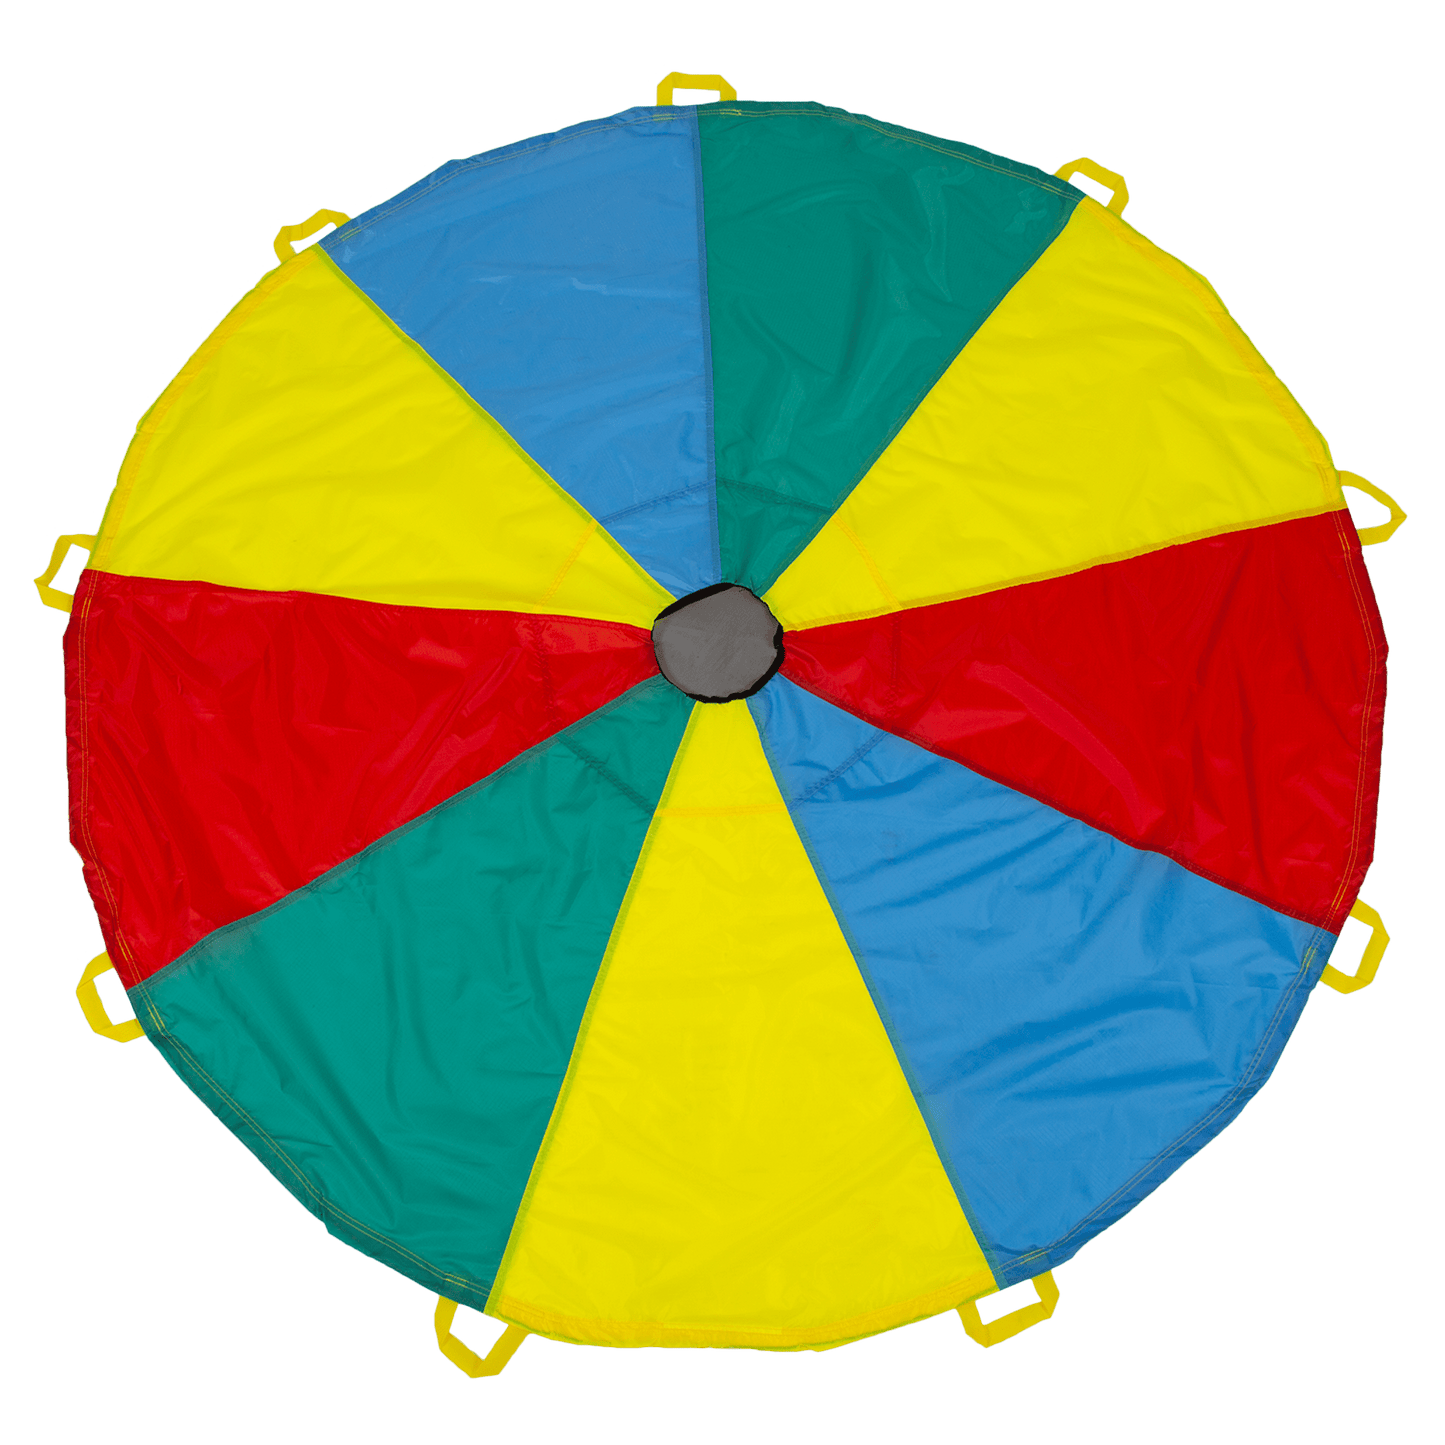 Primary Parachute 6ft - Multi Color with Handles